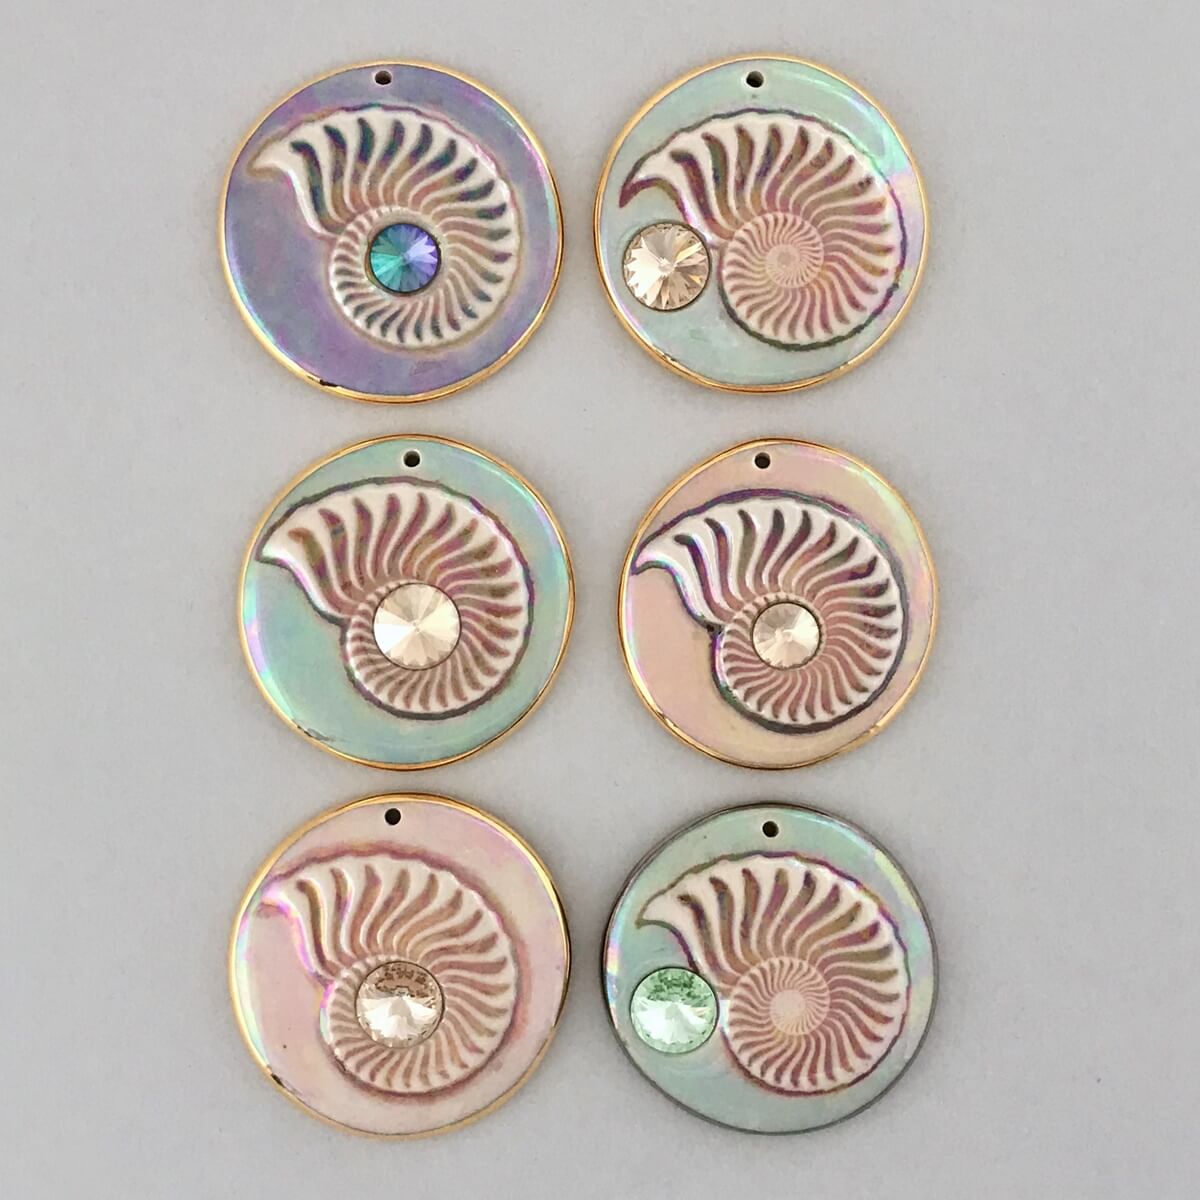 Nautilus shells accented with Swarovski crystal accents.